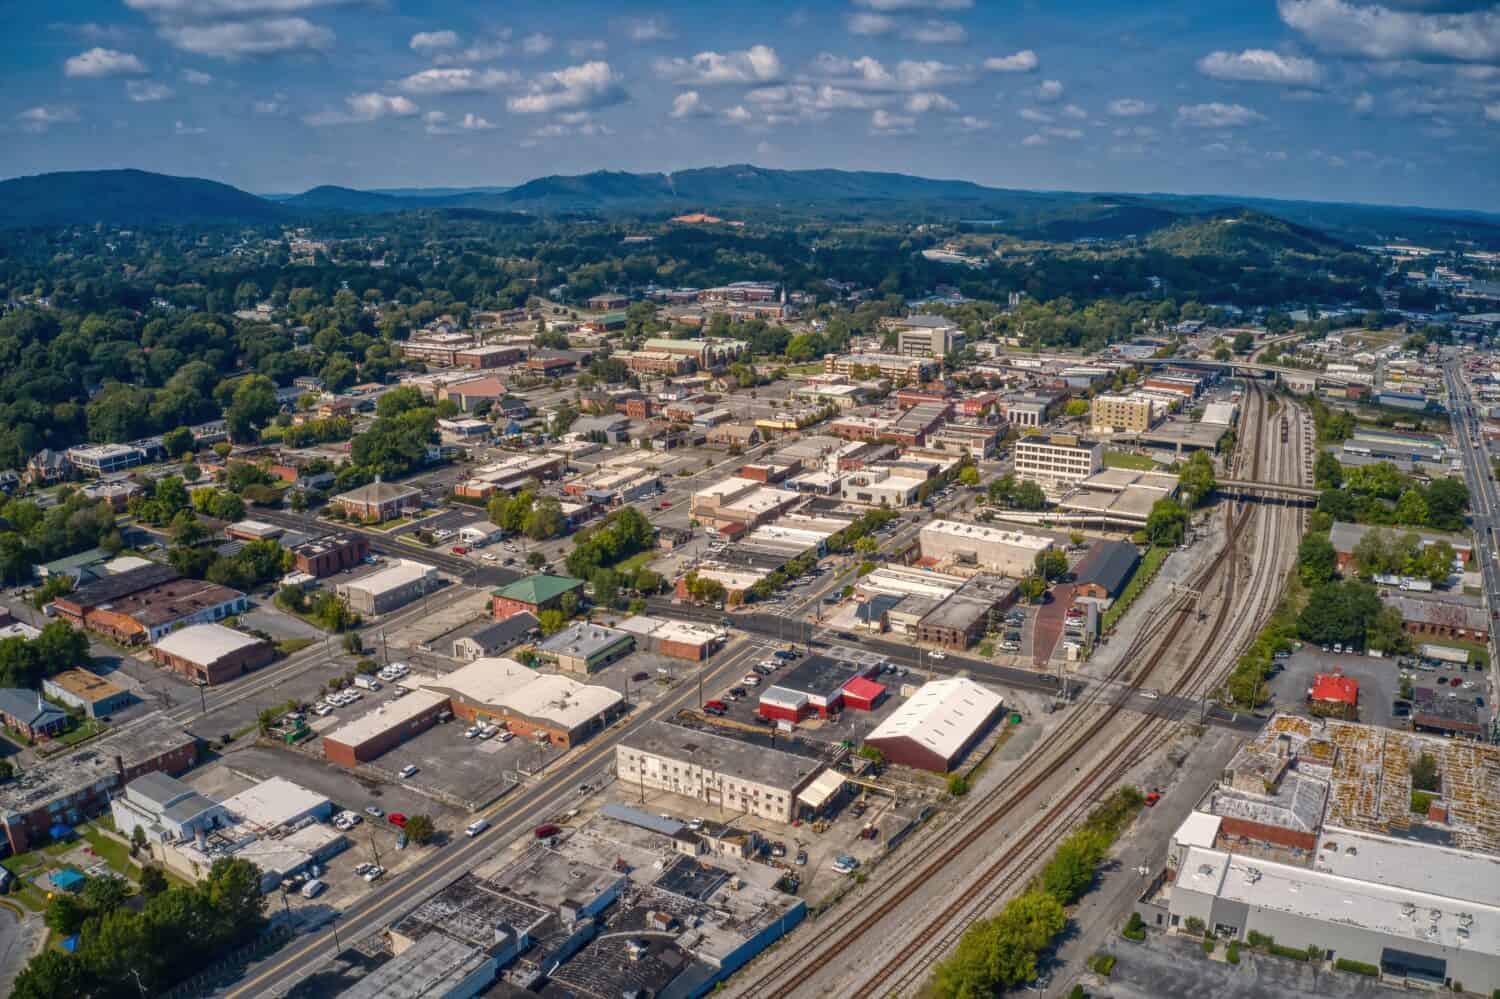 Aerial View of Downtown of Dalton, Georgia during Summer